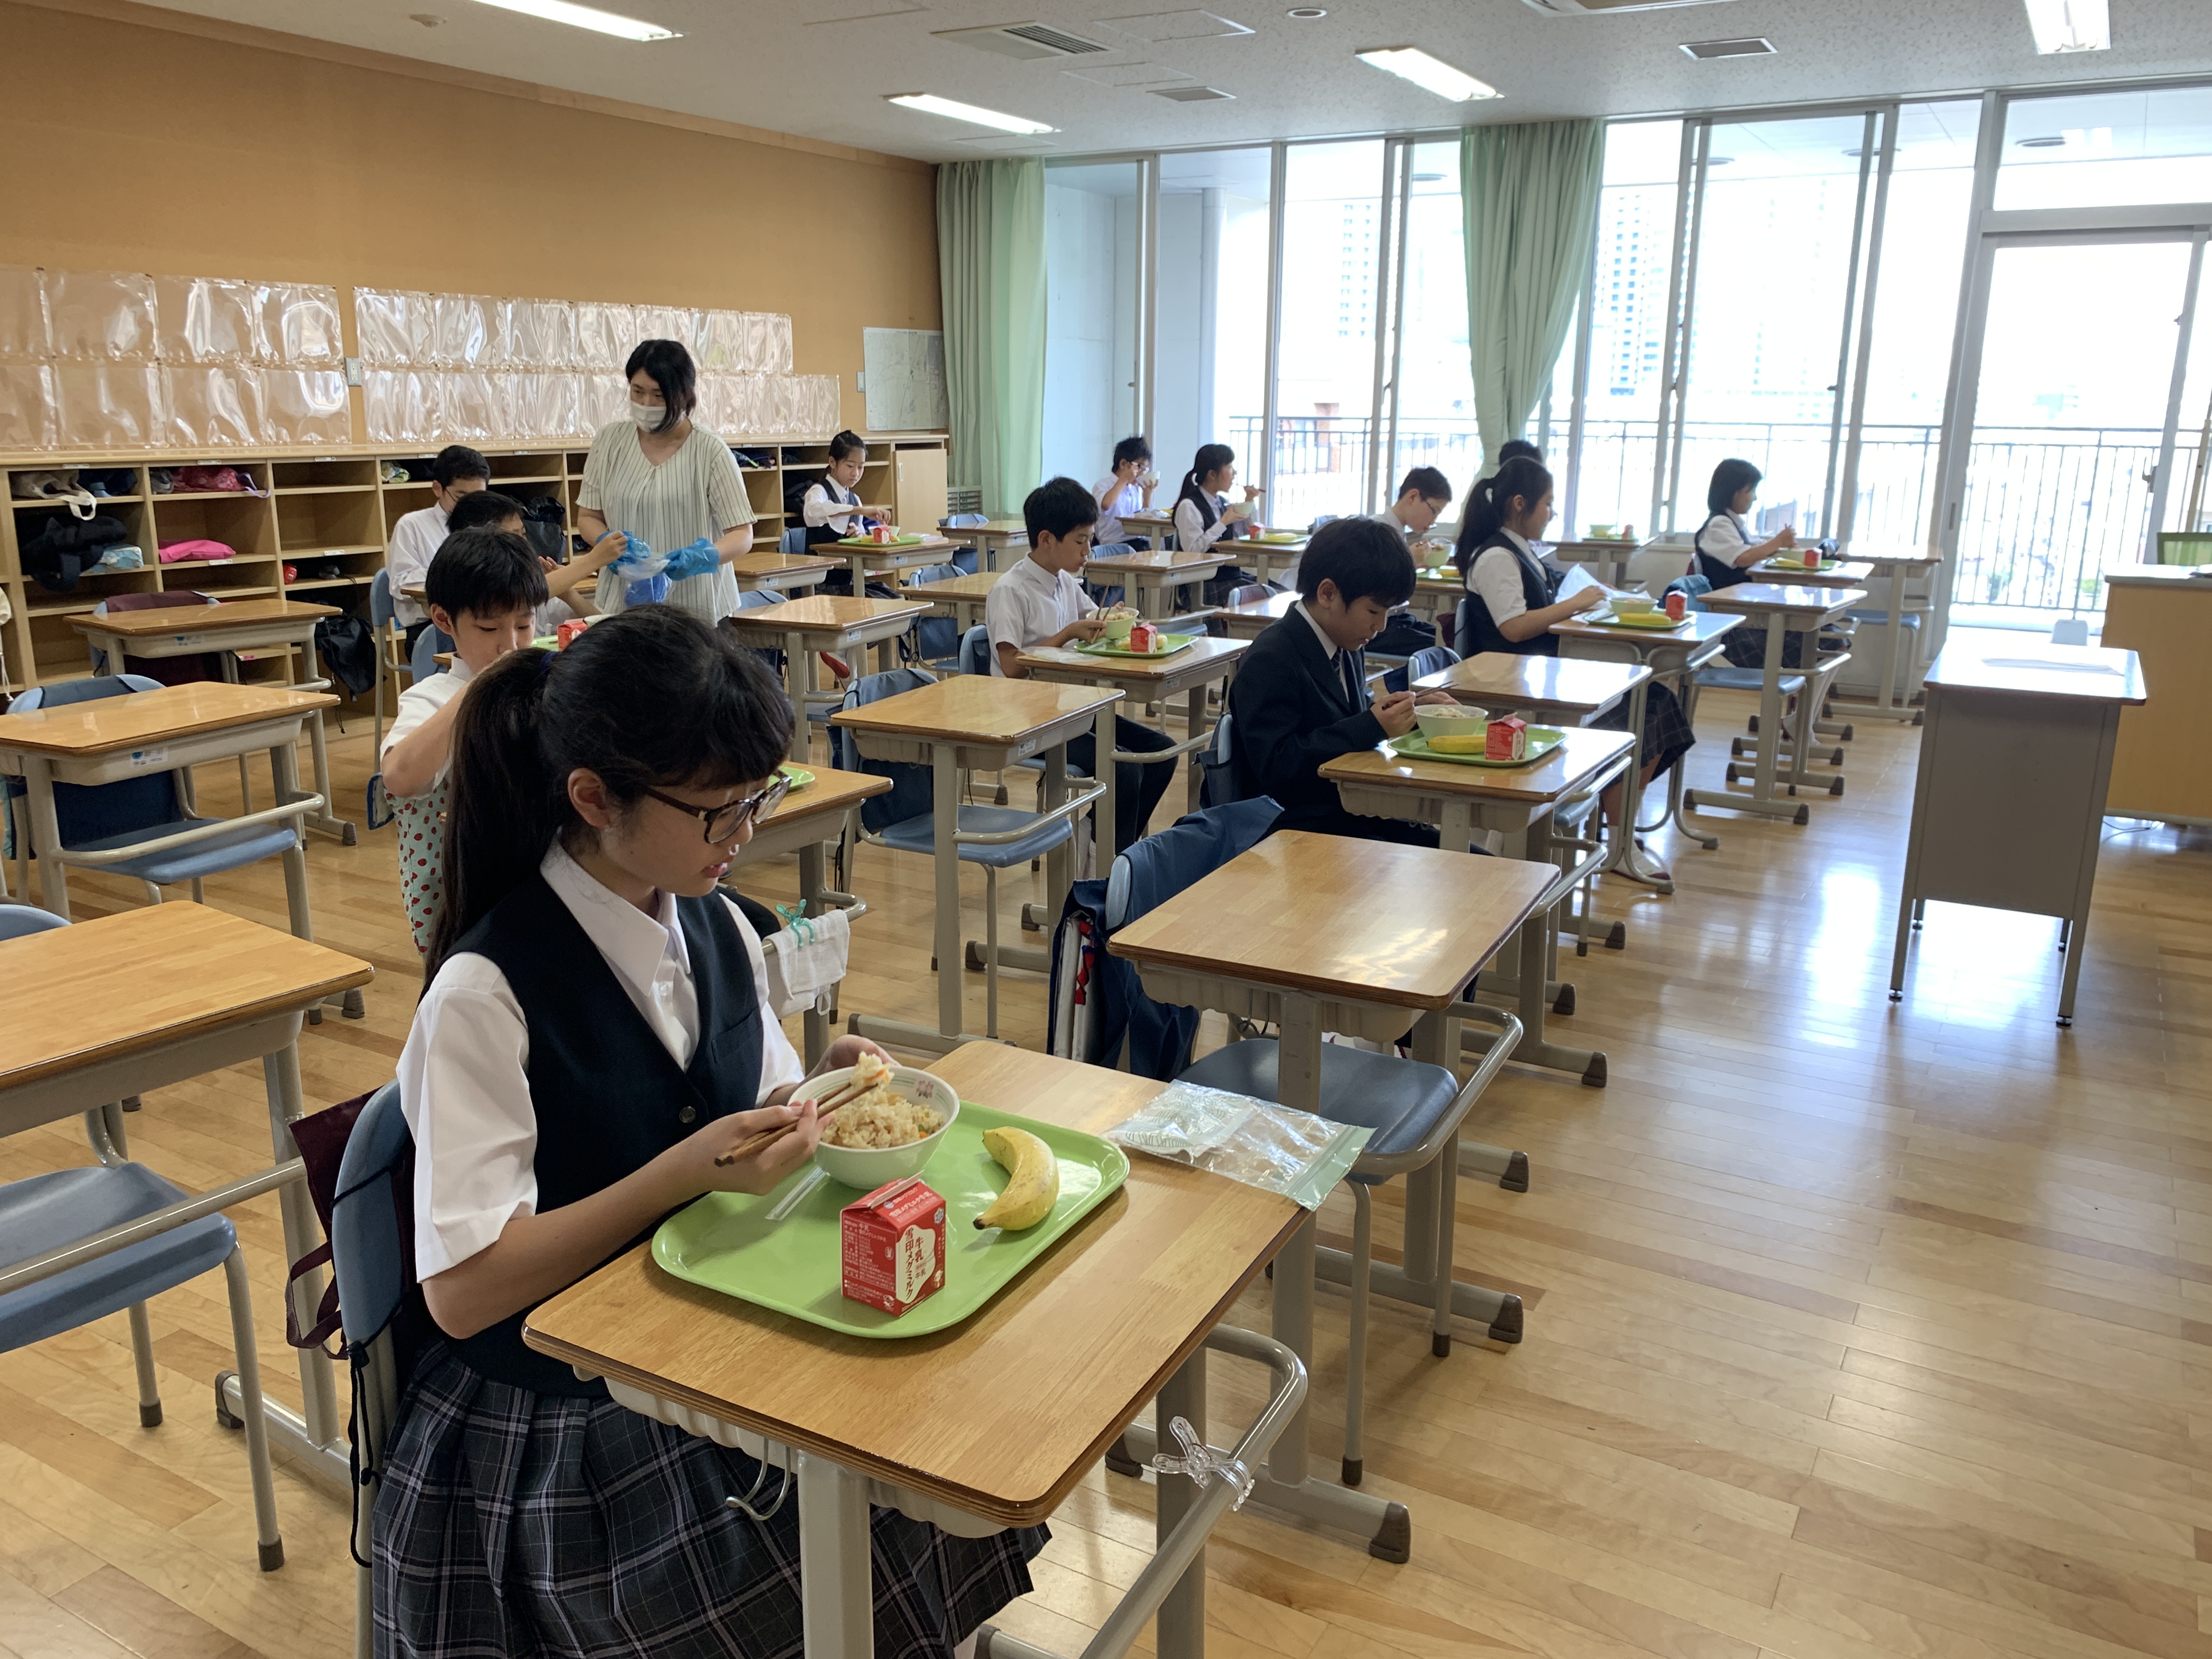 Japan: Students Are Now Permitted To Converse During Lunch As The Number Of Covid Cases Continues To Decrease